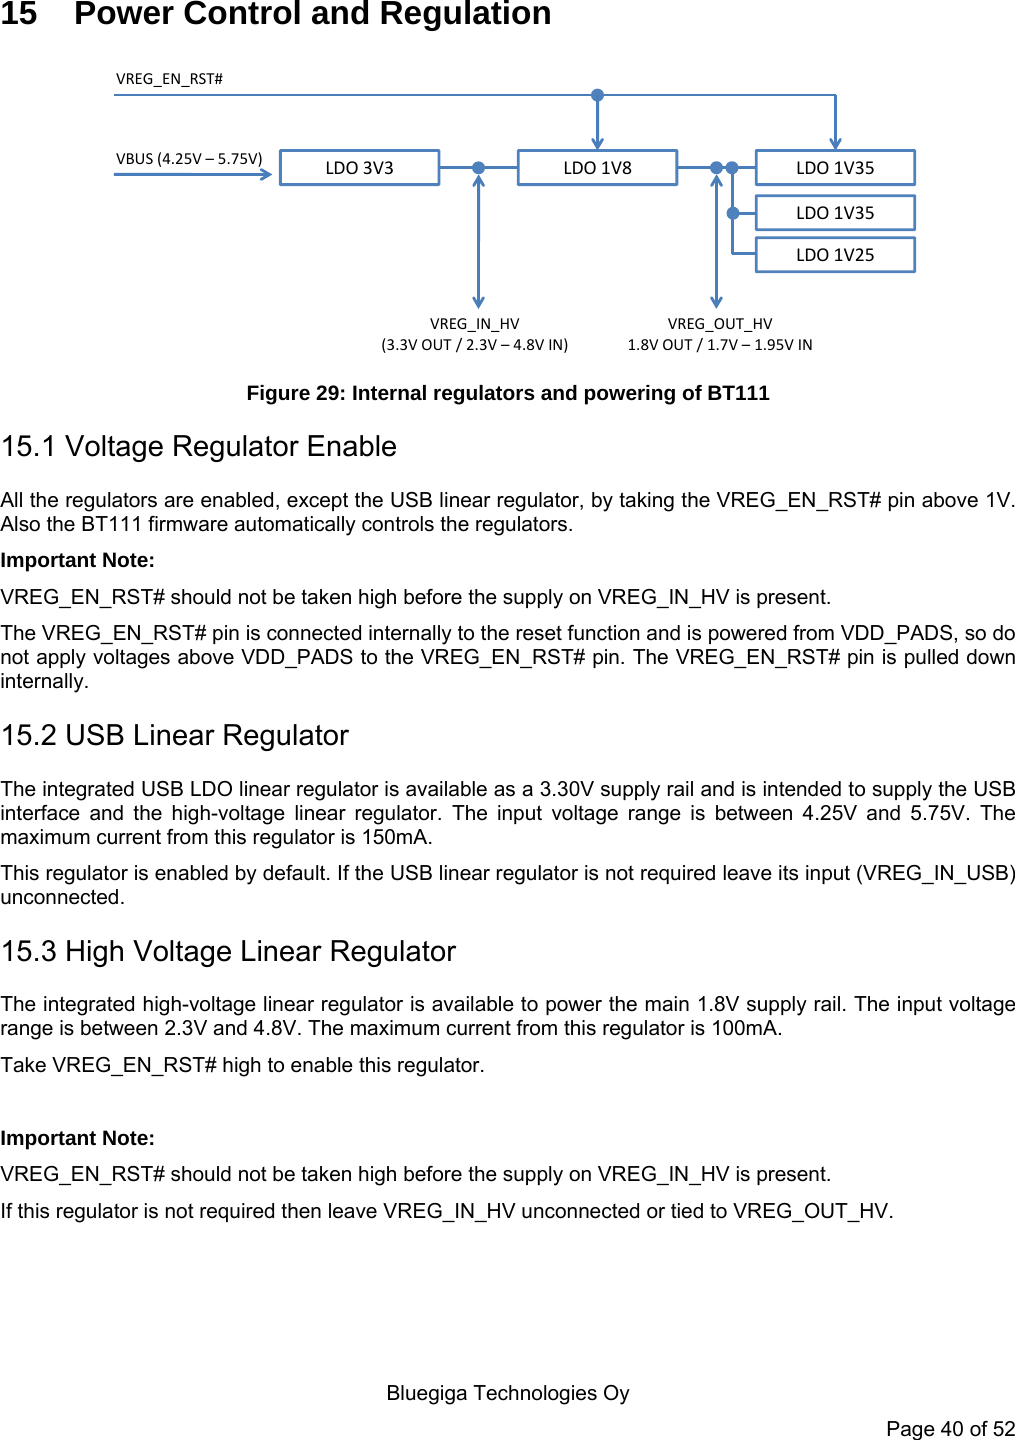    Bluegiga Technologies Oy Page 40 of 52 15  Power Control and Regulation LDO 3V3 LDO 1V8 LDO 1V35VBUS (4.25V – 5.75V)VREG_IN_HV(3.3V OUT / 2.3V – 4.8V IN)VREG_OUT_HV1.8V OUT / 1.7V – 1.95V INVREG_EN_RST#LDO 1V35LDO 1V25 Figure 29: Internal regulators and powering of BT111 15.1 Voltage Regulator Enable All the regulators are enabled, except the USB linear regulator, by taking the VREG_EN_RST# pin above 1V. Also the BT111 firmware automatically controls the regulators. Important Note: VREG_EN_RST# should not be taken high before the supply on VREG_IN_HV is present. The VREG_EN_RST# pin is connected internally to the reset function and is powered from VDD_PADS, so do not apply voltages above VDD_PADS to the VREG_EN_RST# pin. The VREG_EN_RST# pin is pulled down internally. 15.2 USB Linear Regulator The integrated USB LDO linear regulator is available as a 3.30V supply rail and is intended to supply the USB interface and the high-voltage linear regulator. The input voltage range is between 4.25V and 5.75V. The maximum current from this regulator is 150mA. This regulator is enabled by default. If the USB linear regulator is not required leave its input (VREG_IN_USB) unconnected. 15.3 High Voltage Linear Regulator The integrated high-voltage linear regulator is available to power the main 1.8V supply rail. The input voltage range is between 2.3V and 4.8V. The maximum current from this regulator is 100mA. Take VREG_EN_RST# high to enable this regulator.  Important Note: VREG_EN_RST# should not be taken high before the supply on VREG_IN_HV is present. If this regulator is not required then leave VREG_IN_HV unconnected or tied to VREG_OUT_HV. 